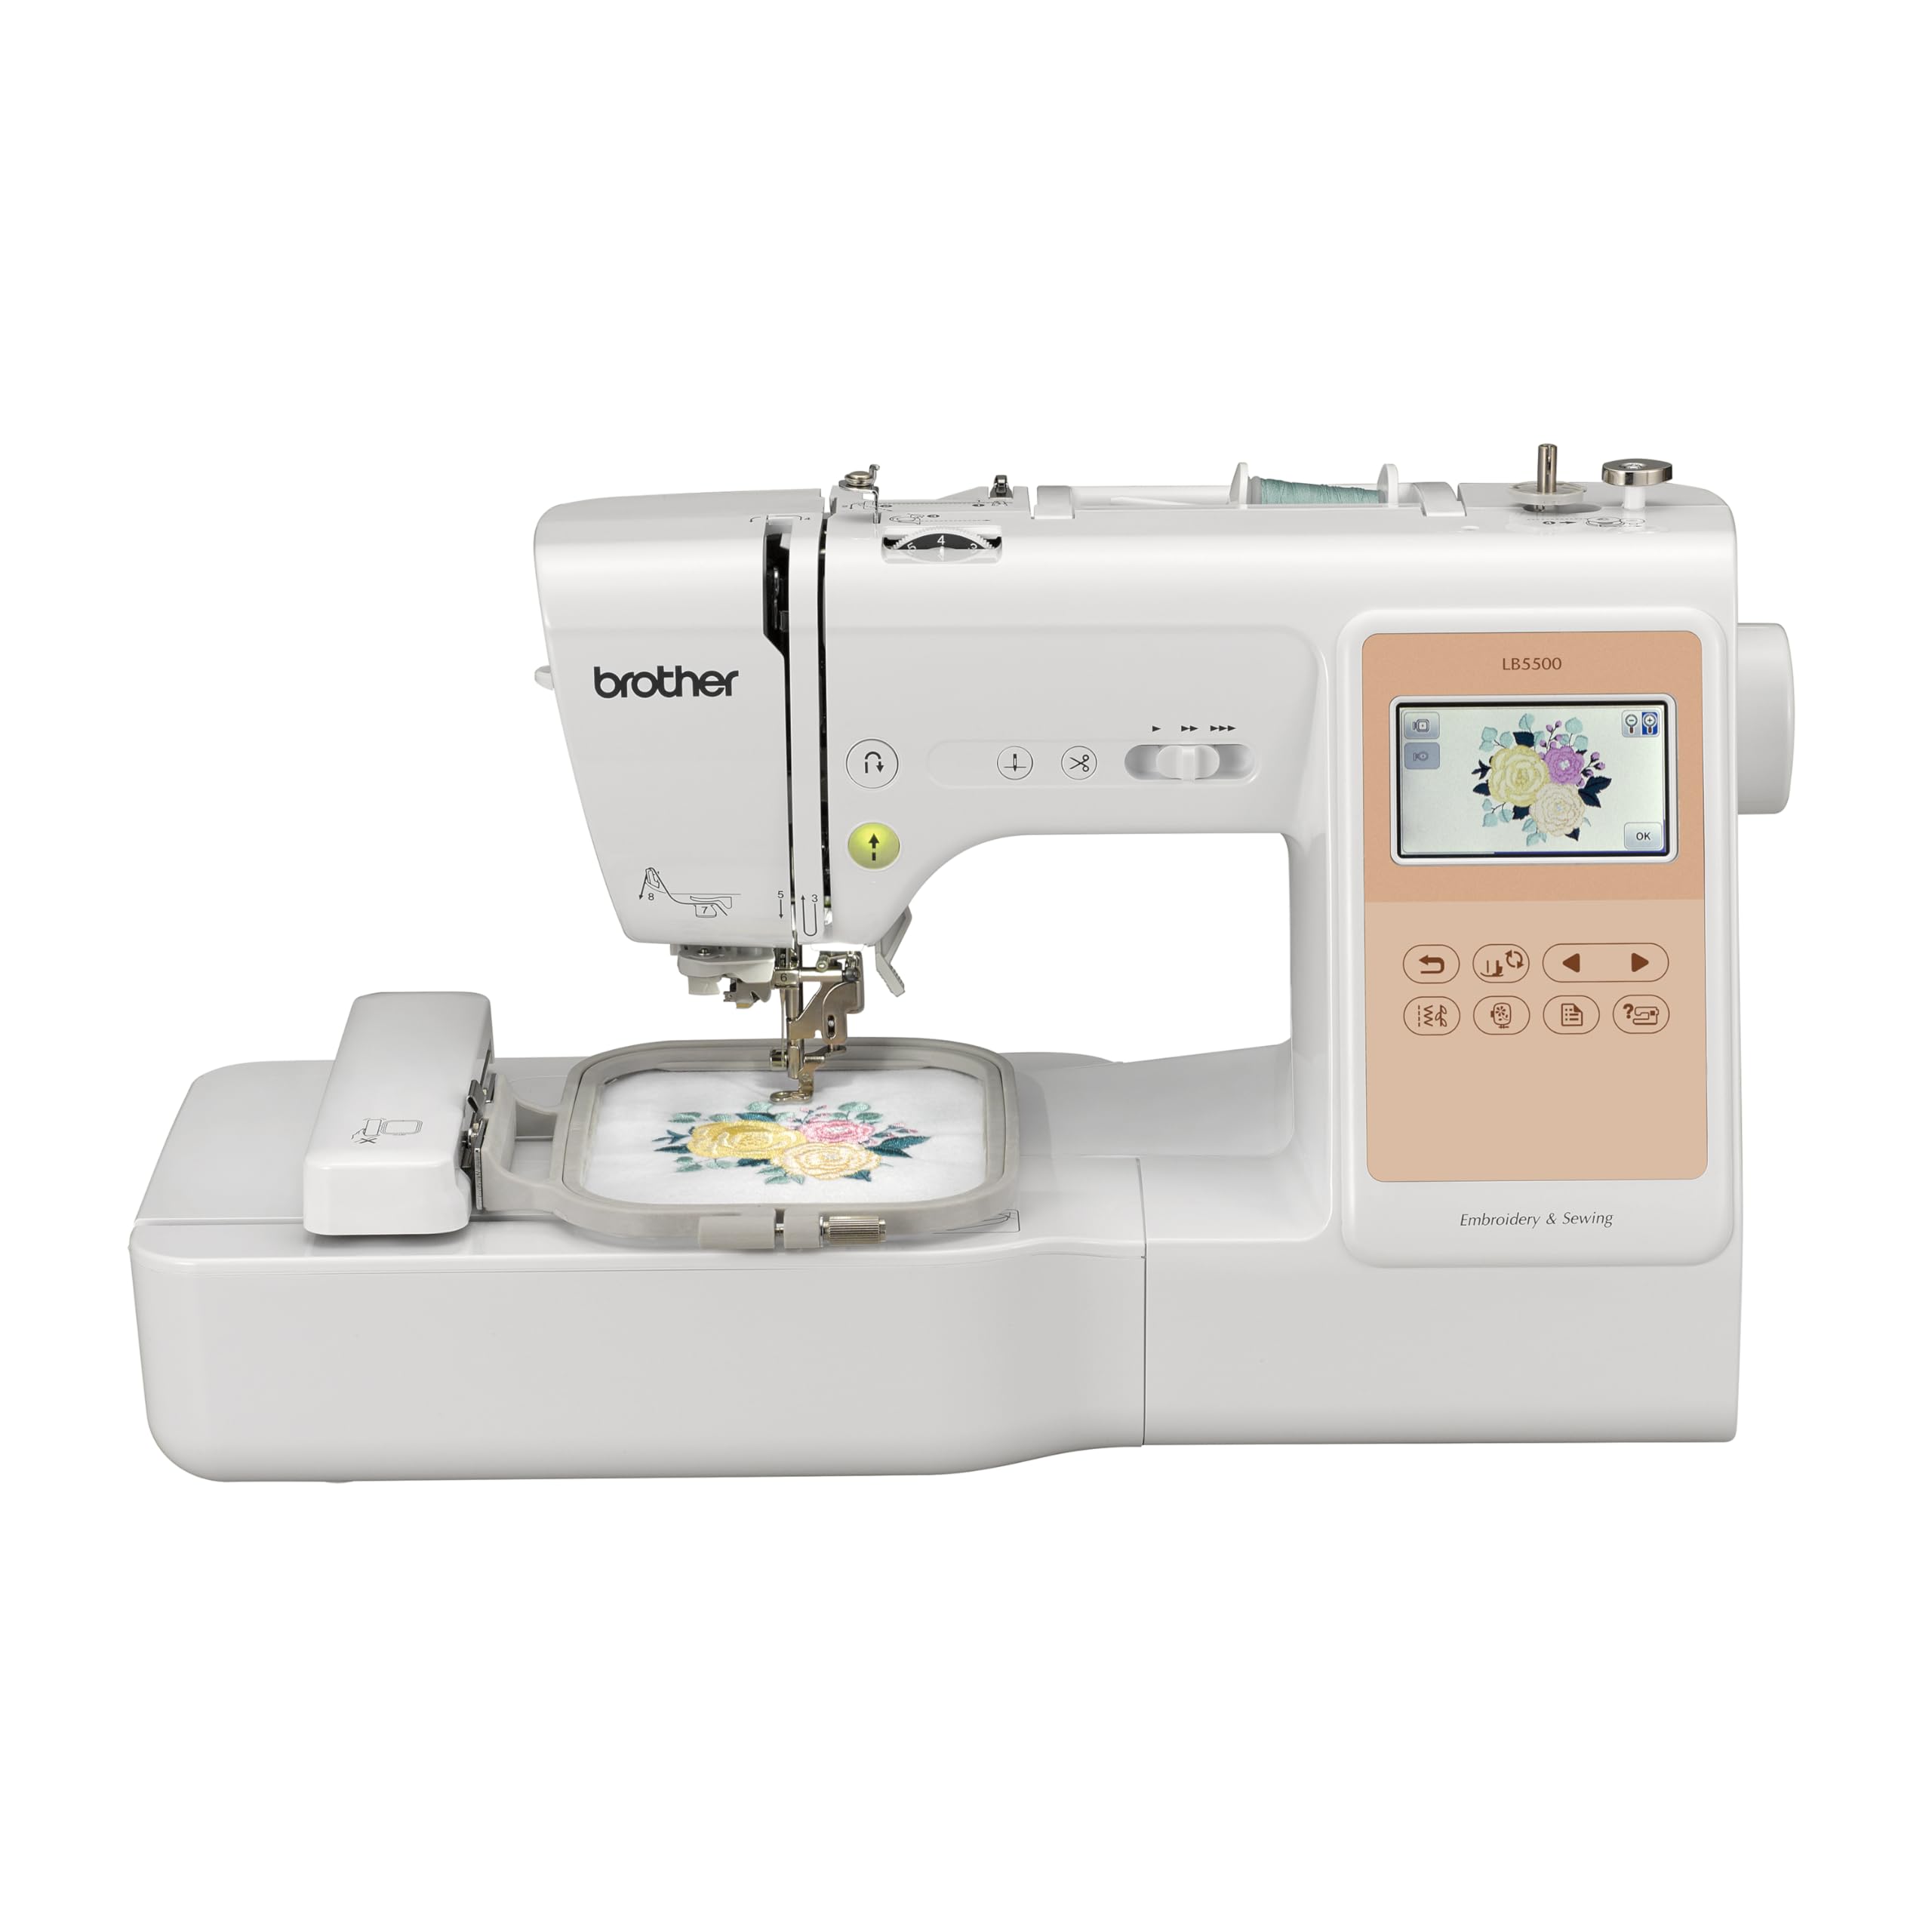 Embroidery machine with software update notification